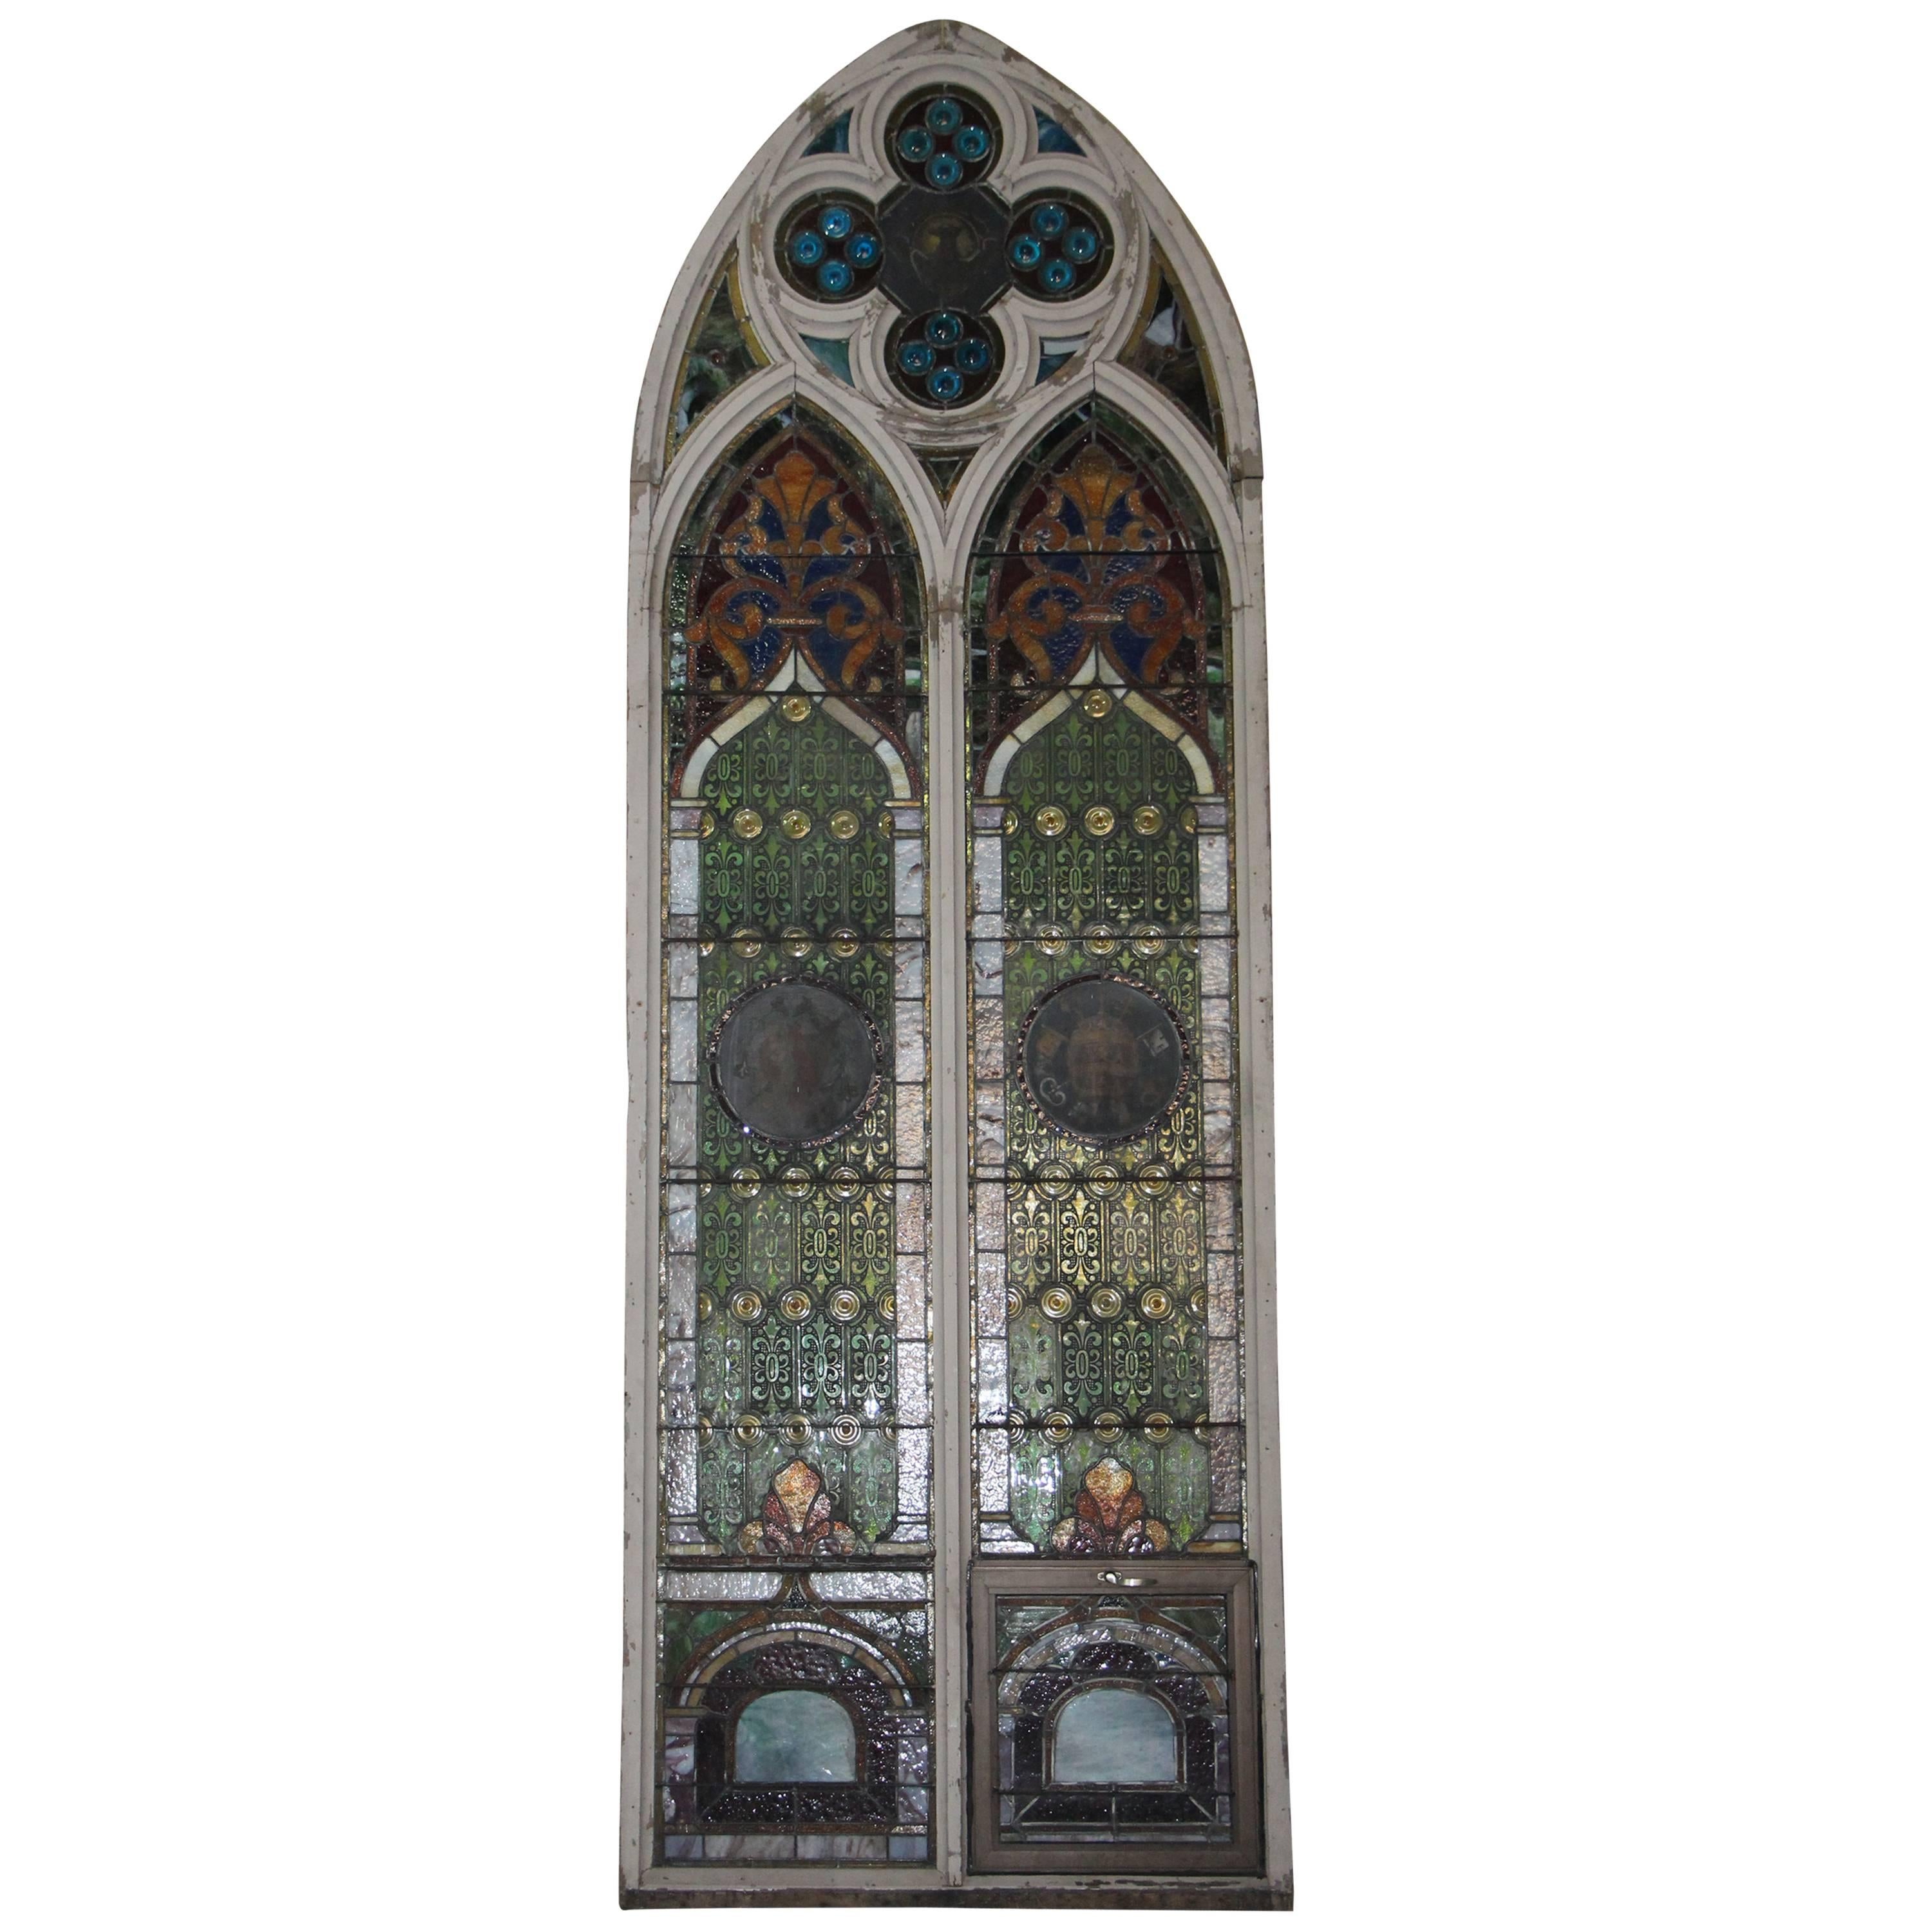 1860s Large Arched Gothic Colored Stained Glass Window from a Wisconsin Church